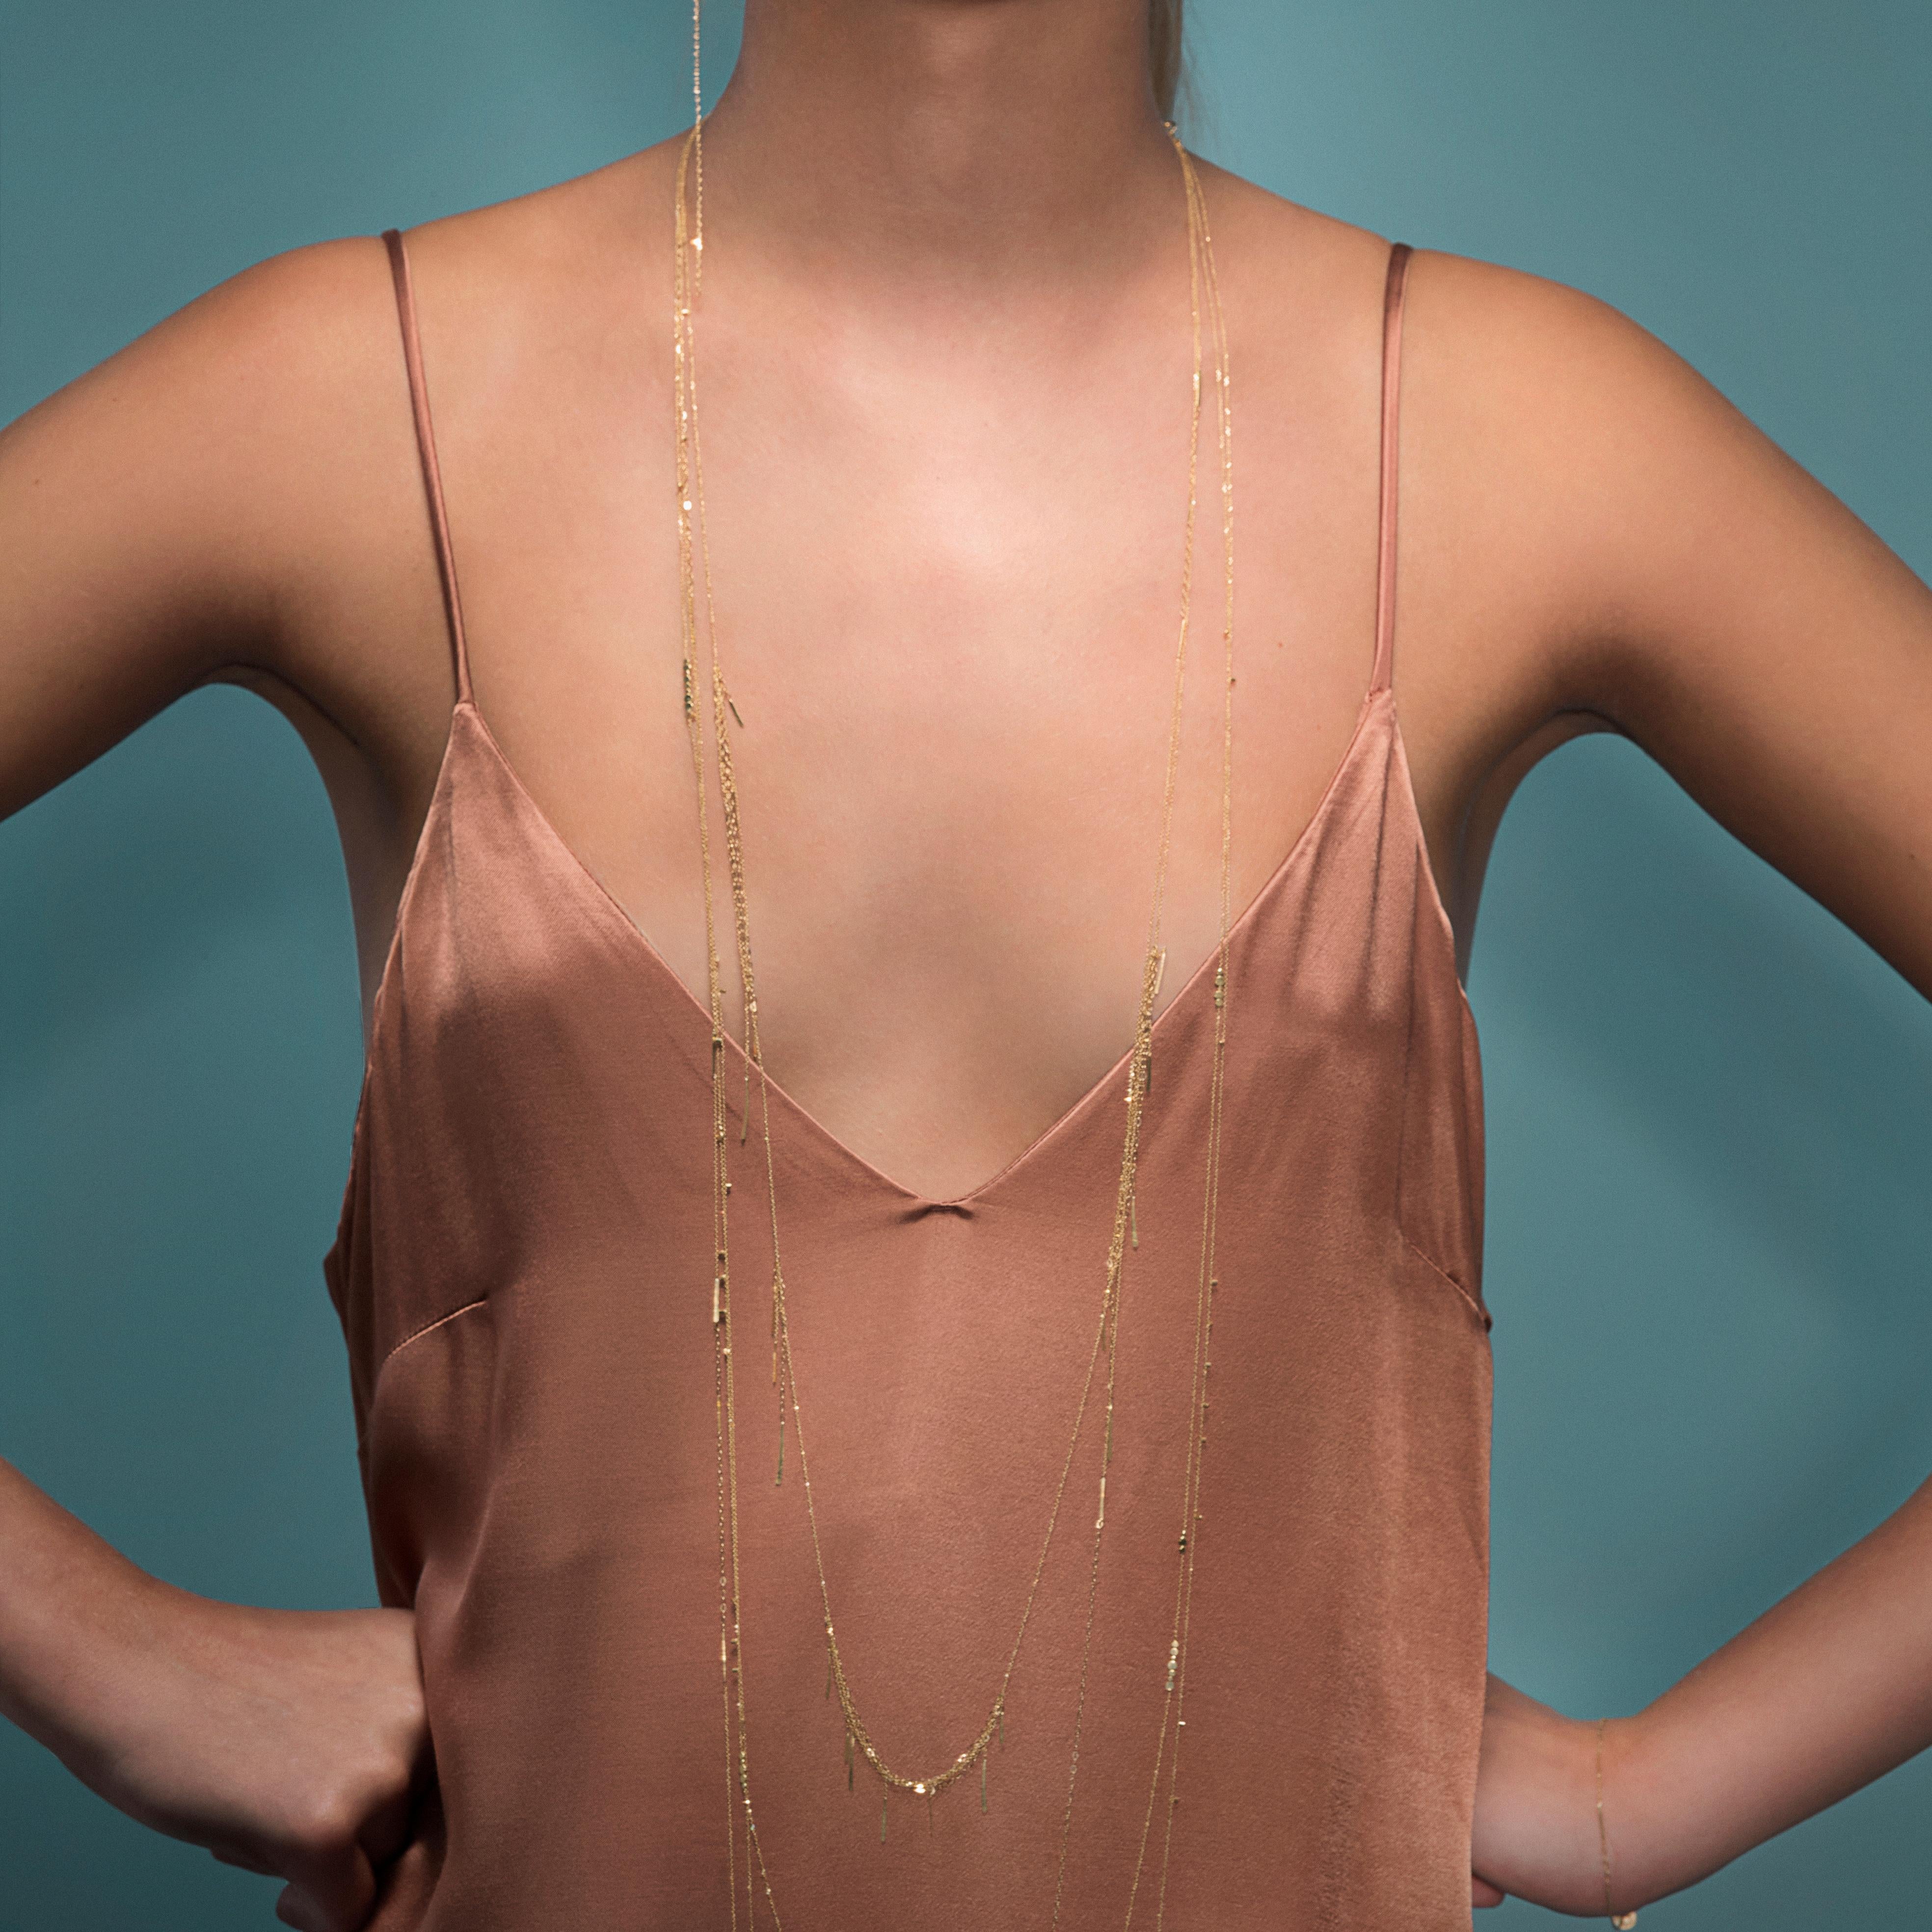 This stunning 101cm long necklace made from a mix of 18kt yellow gold fine chains features sections of layered chain and hanging bar details that catch the light beautifully. It can be worn as a long necklace or wrapped around to give a layered